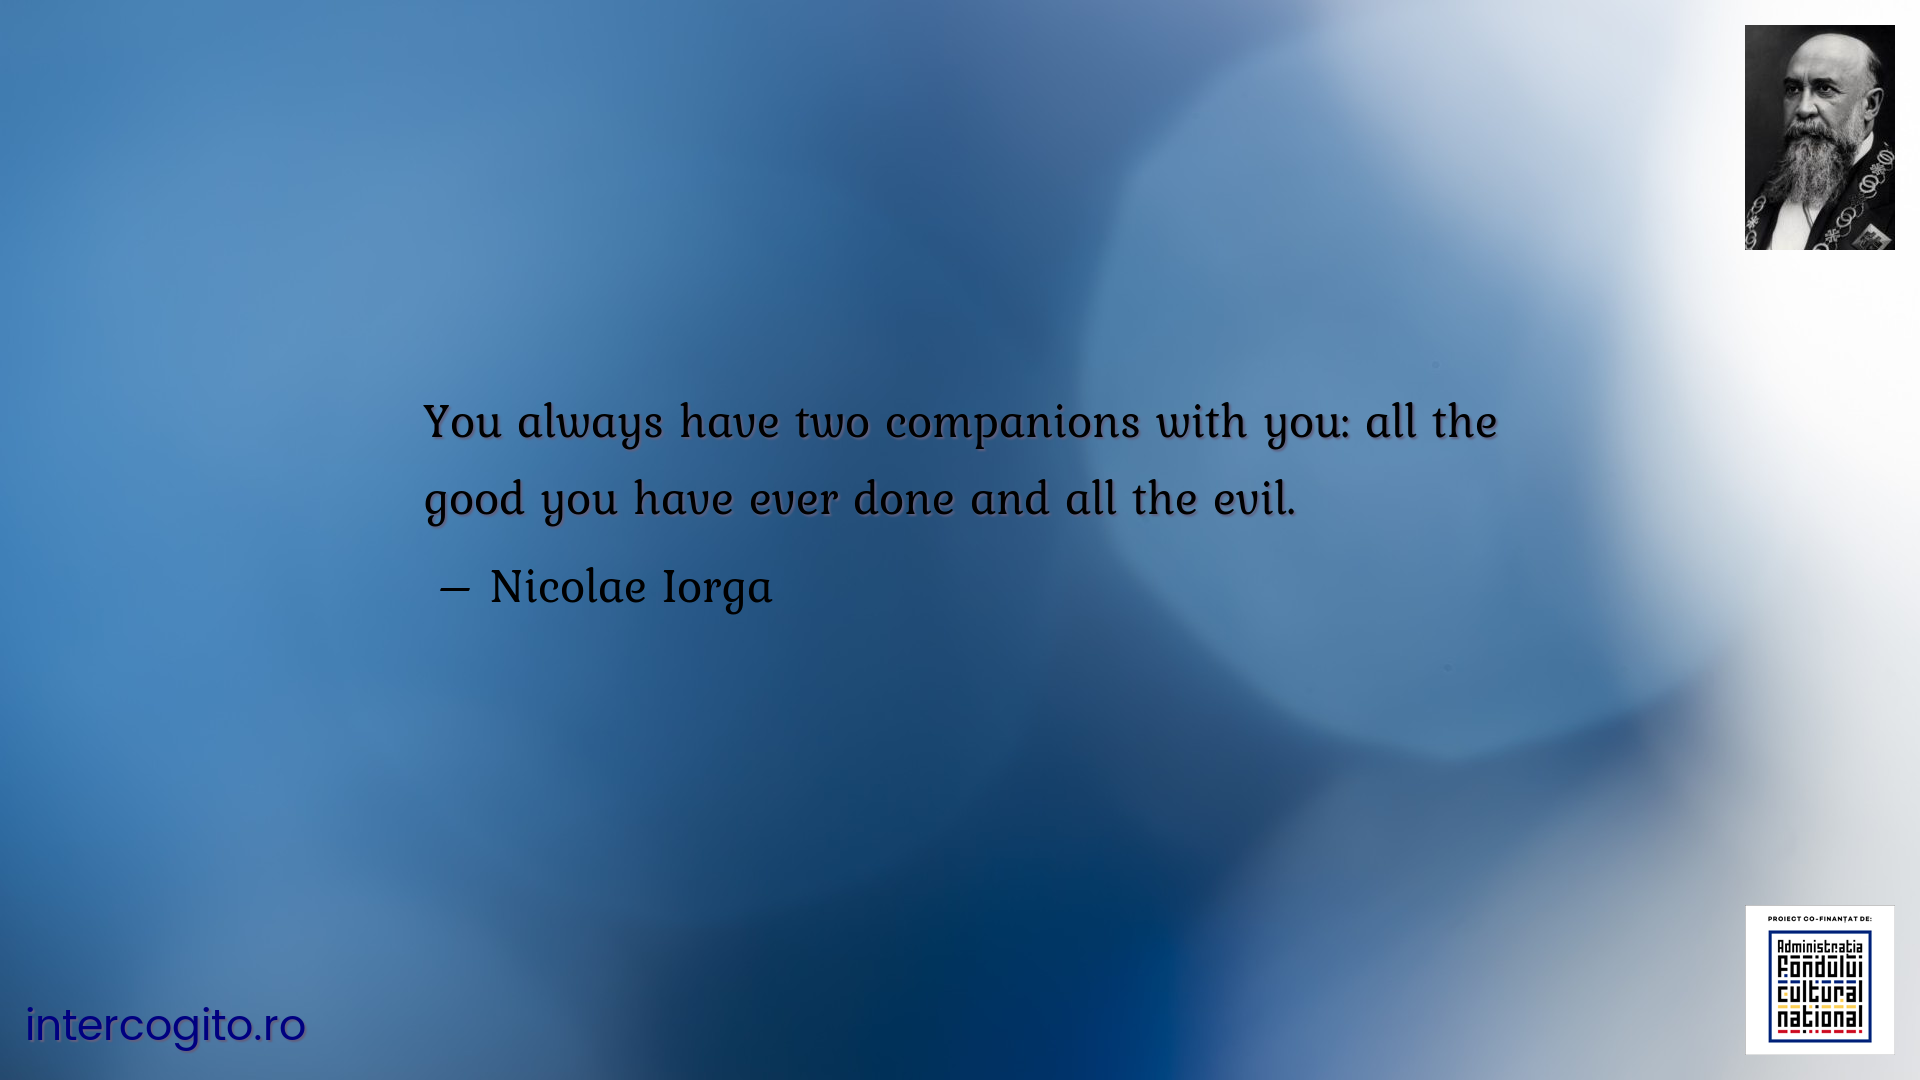 You always have two companions with you: all the good you have ever done and all the evil.